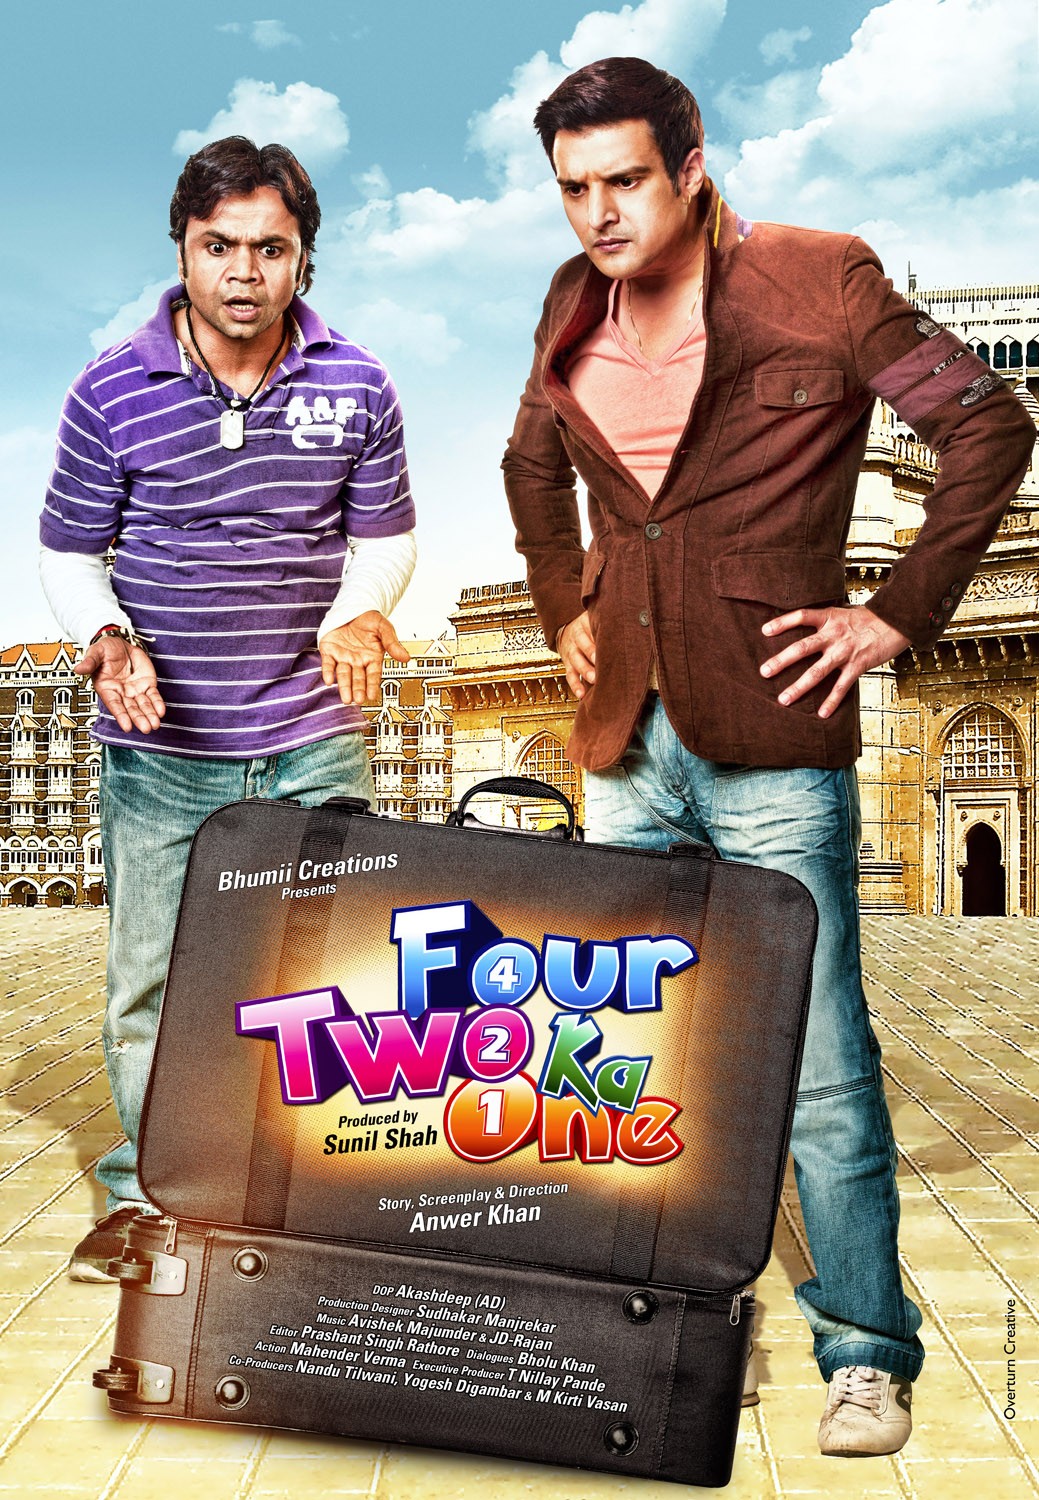 Extra Large Movie Poster Image for Four Two Ka One (#4 of 10)